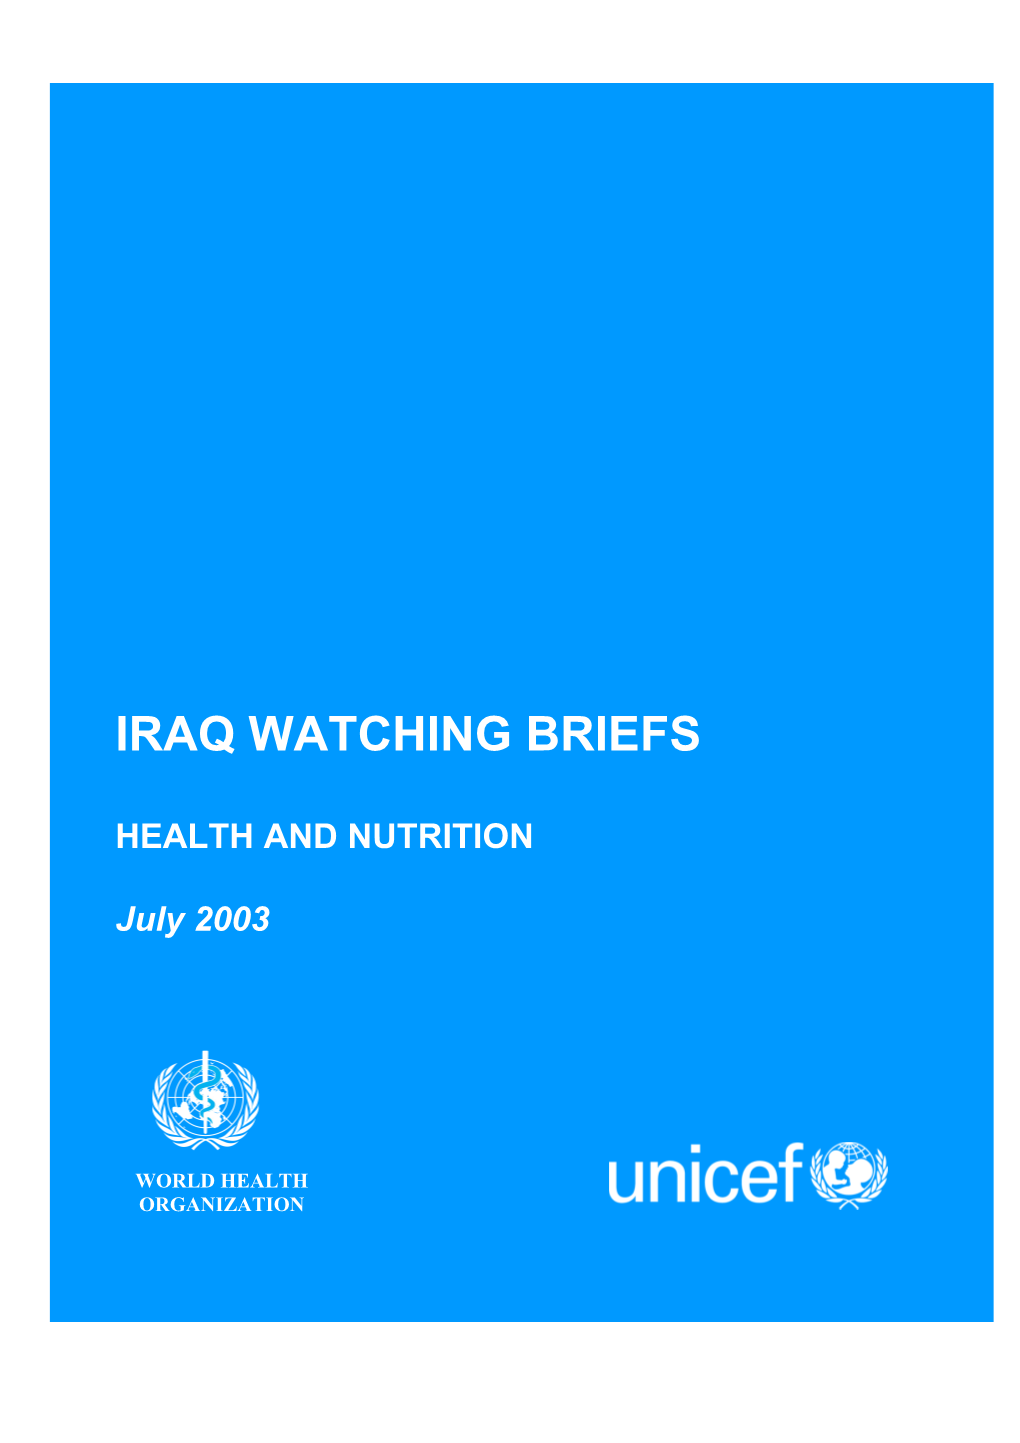 Health and Well-Being in Iraq: Sanctions and the Impact of the Oil for Food Program